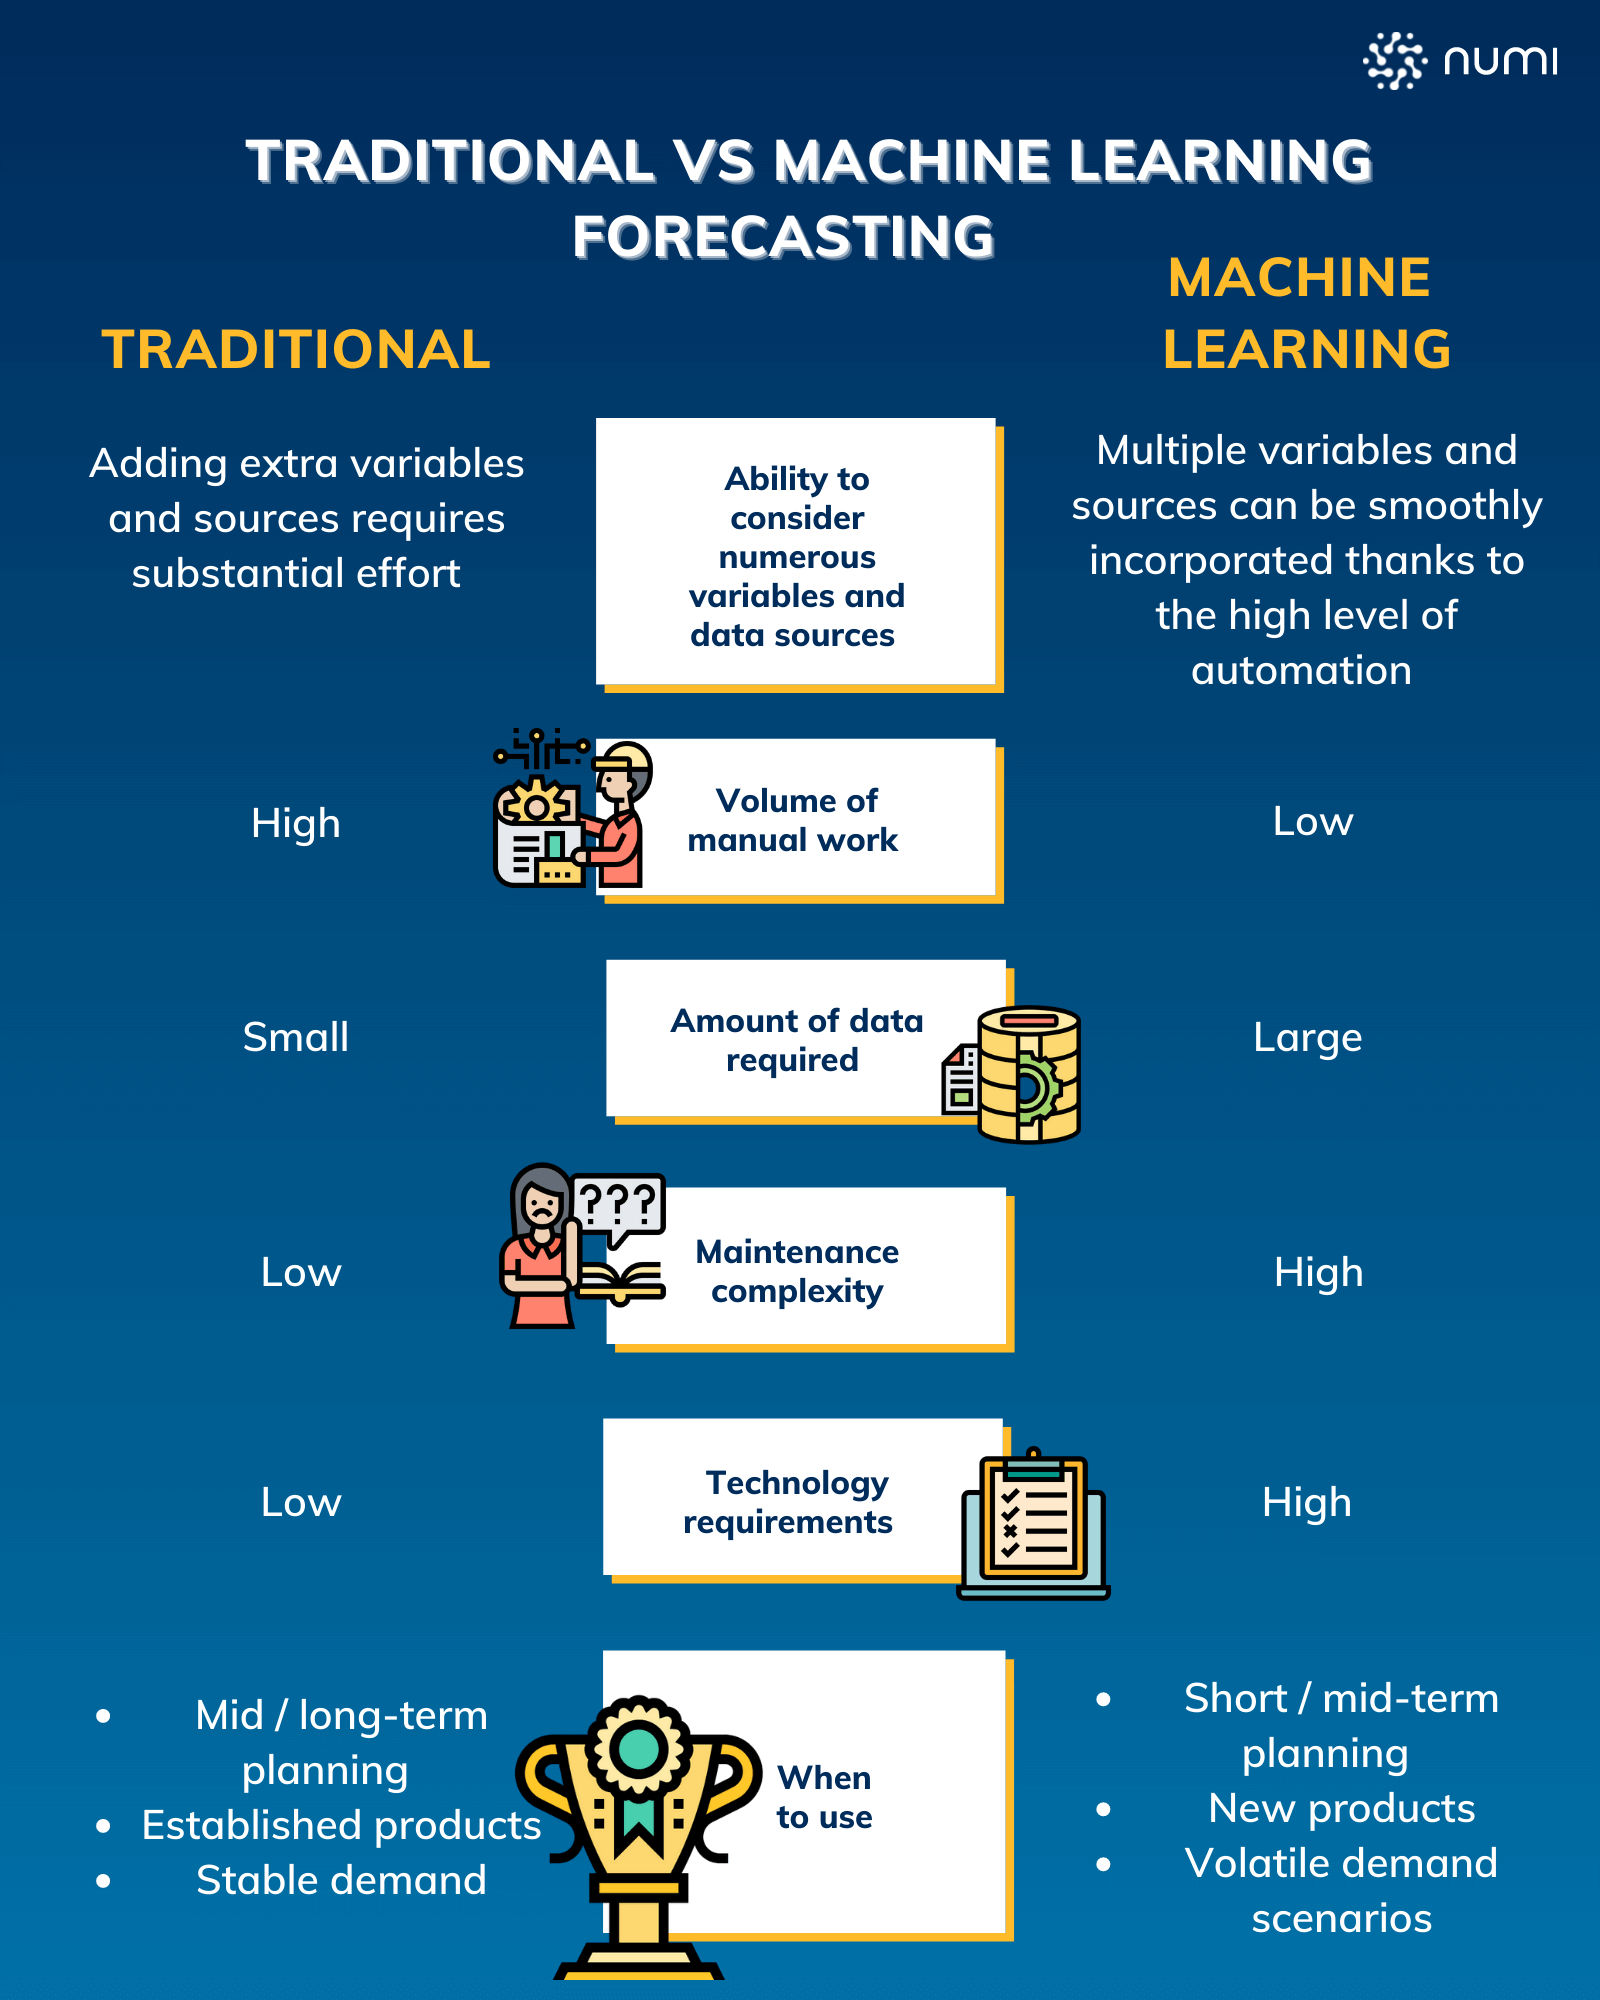 Traditional vs Machine Learning Forecast